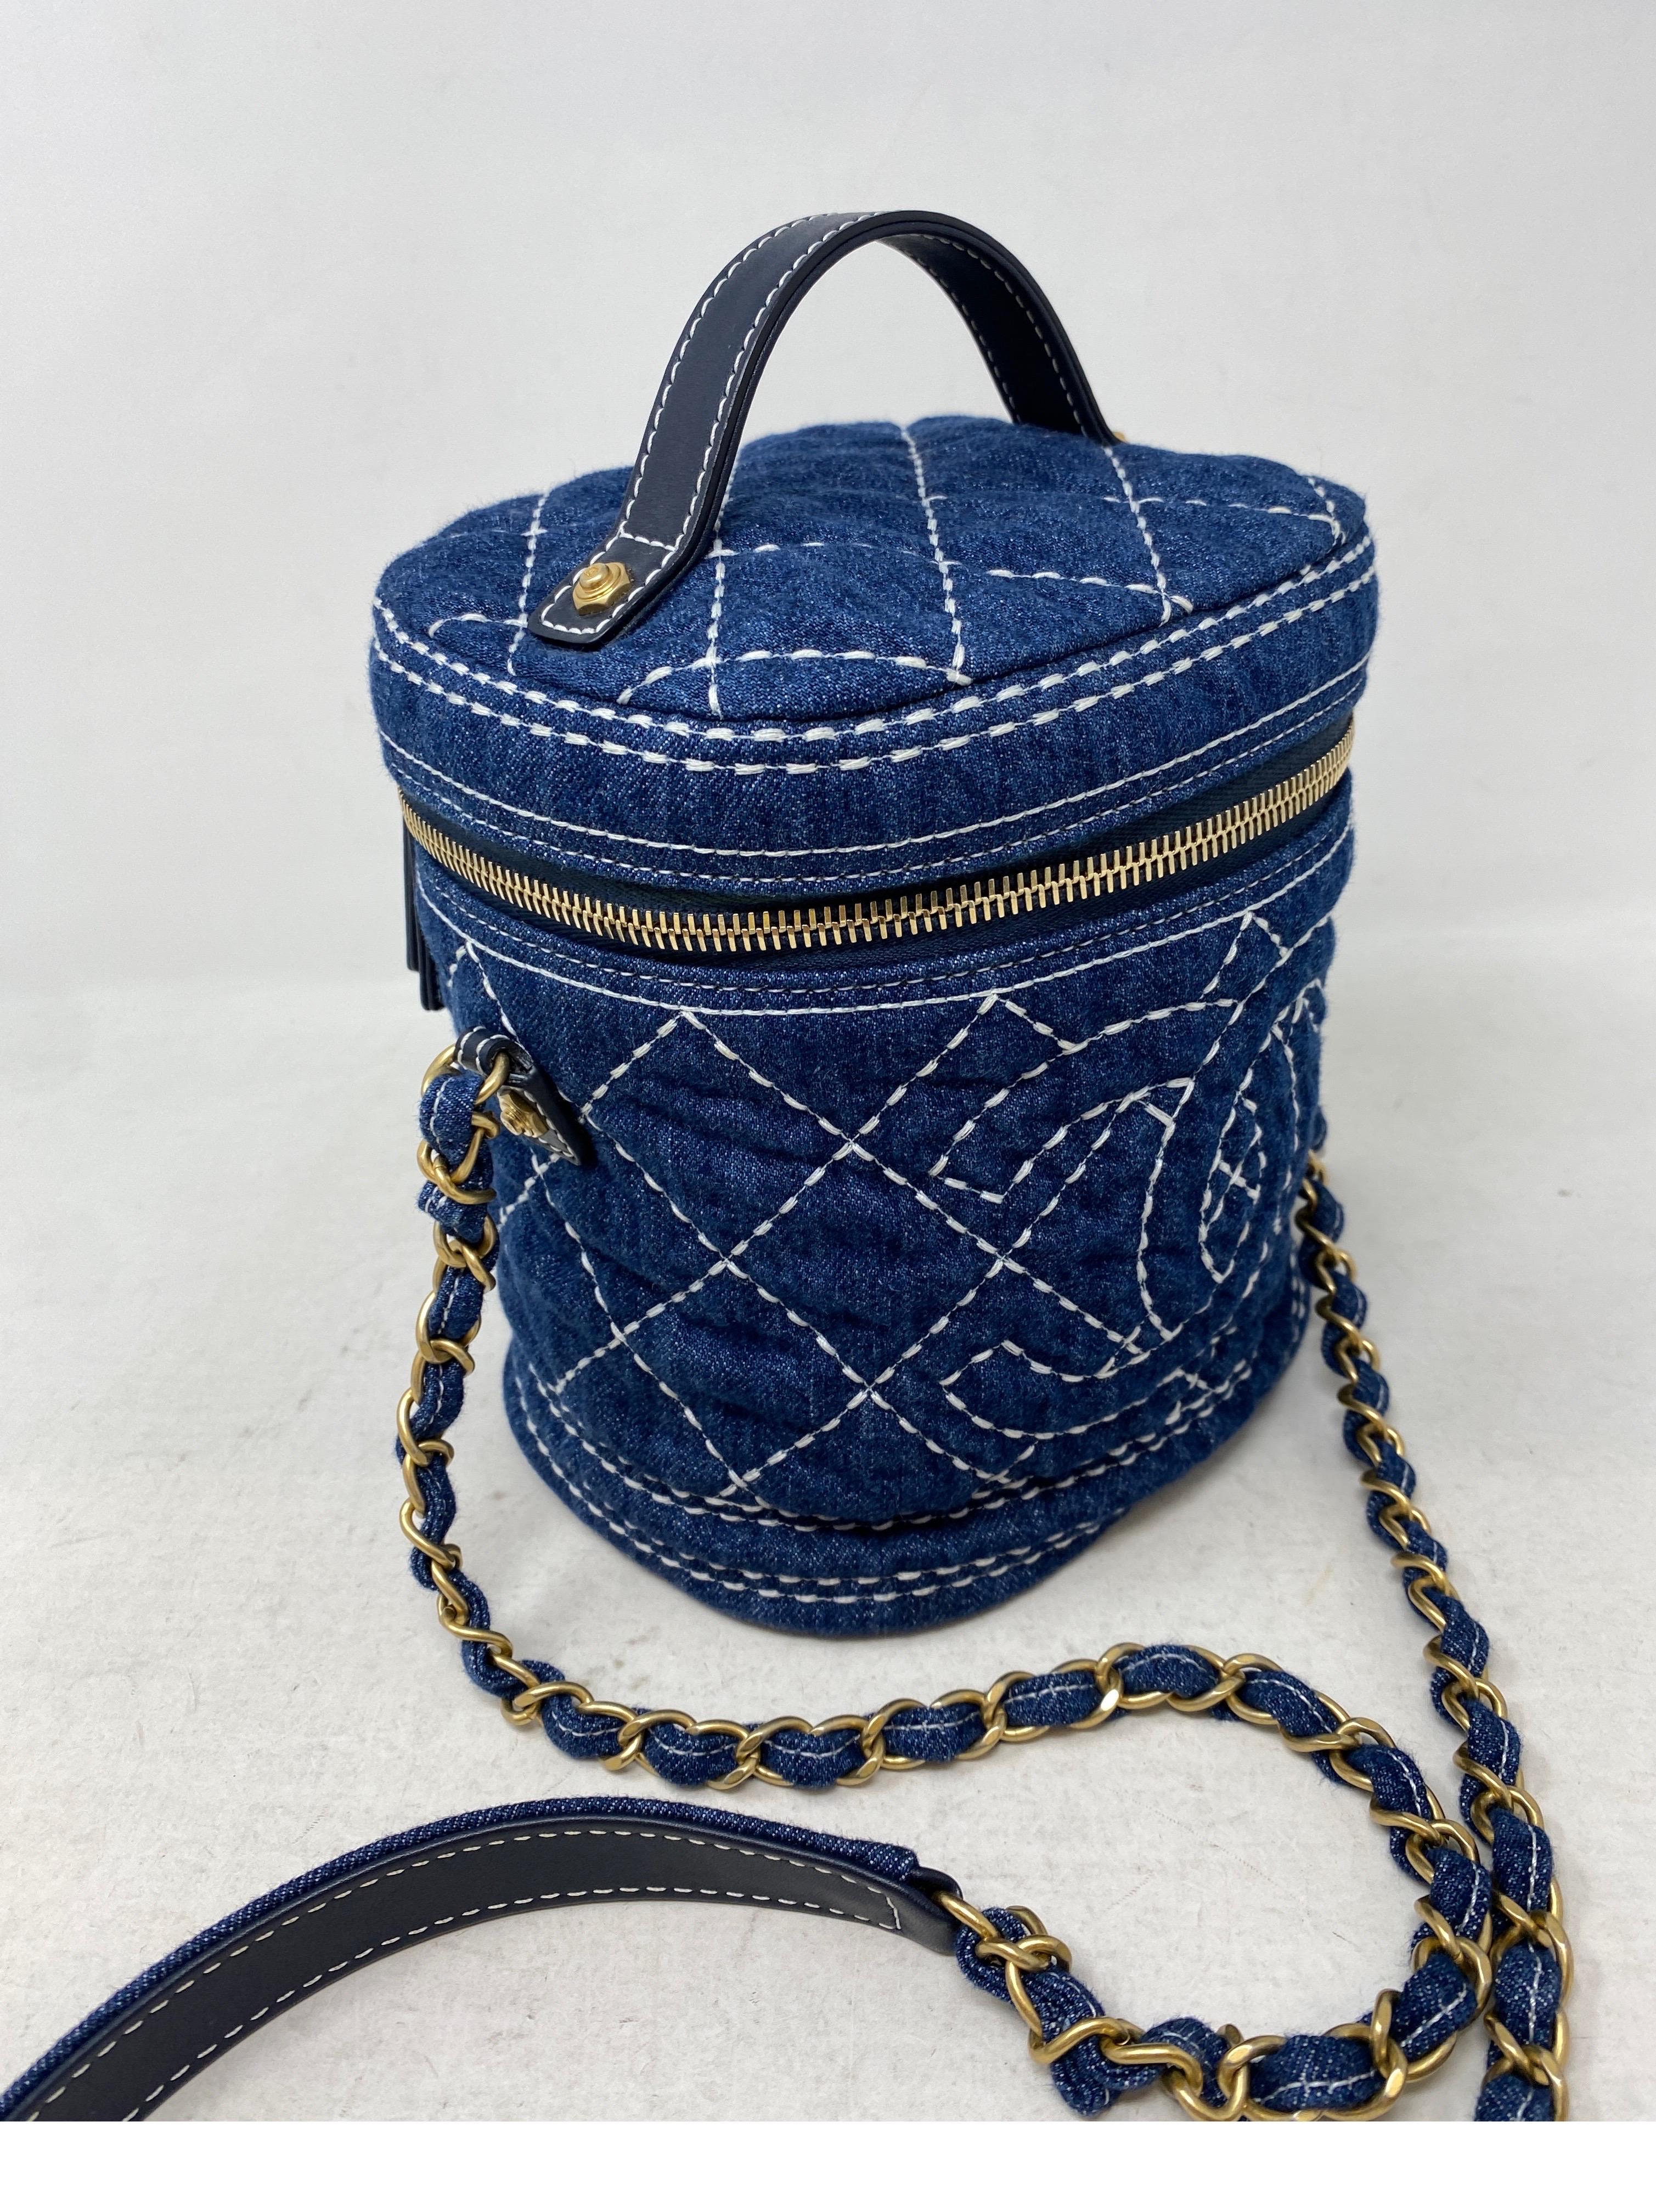 Chanel Denim Vanity Bag. Gorgeous denim bag. Collector's piece. New condition. Includes authenticity card and serial number inside bag. Includes dust cover. Guaranteed authentic. 